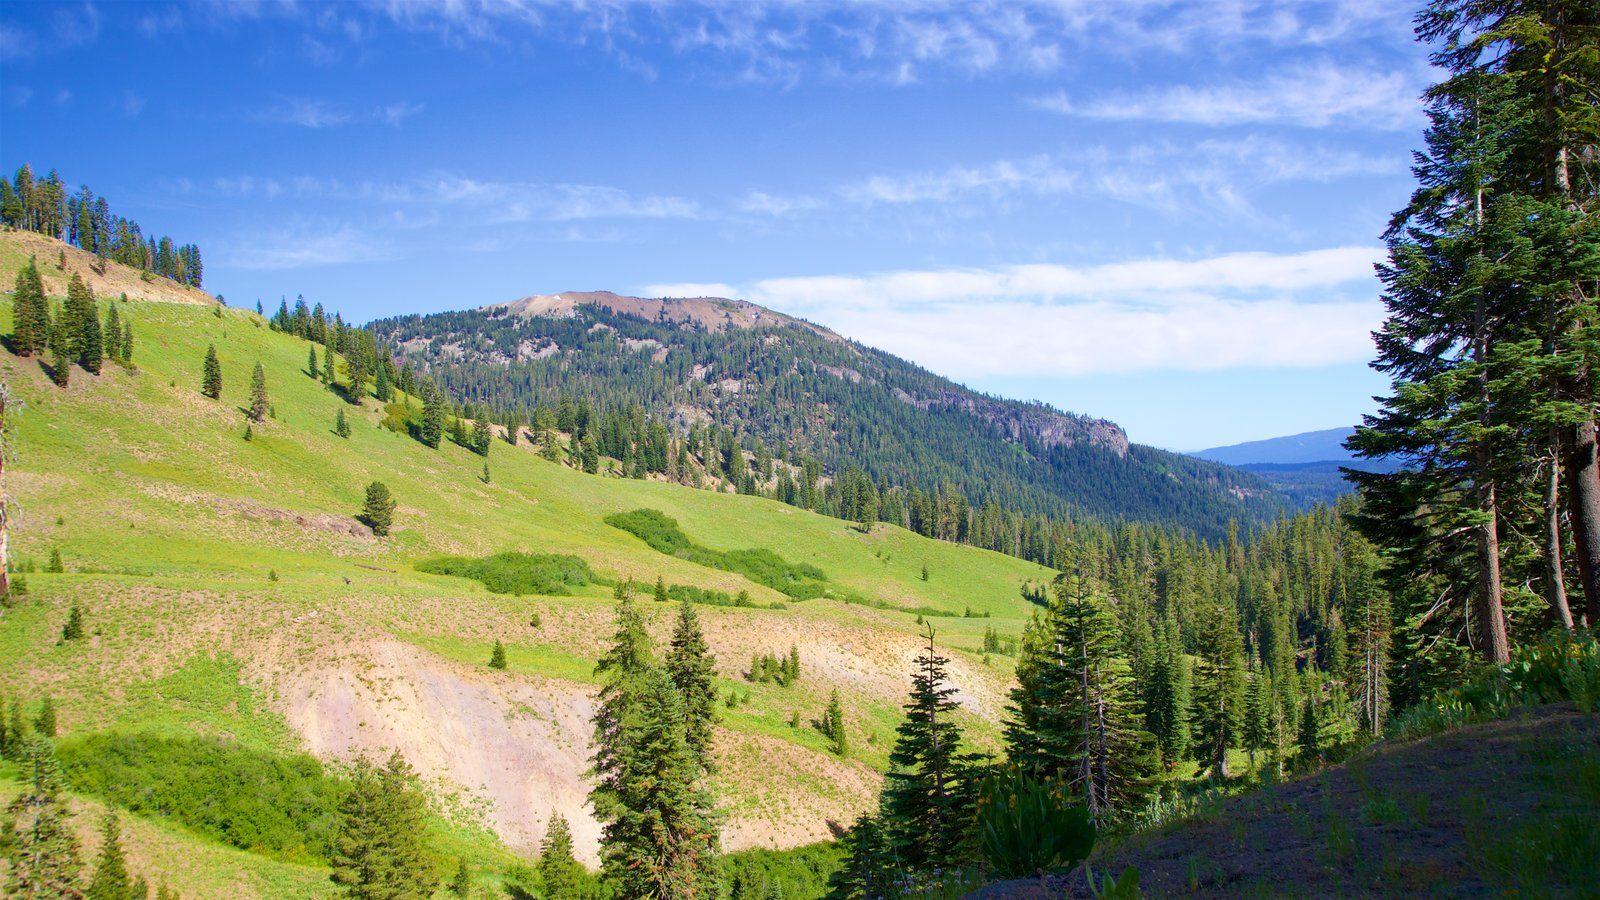 Mountain Picture: View Image of Lassen Volcanic National Park